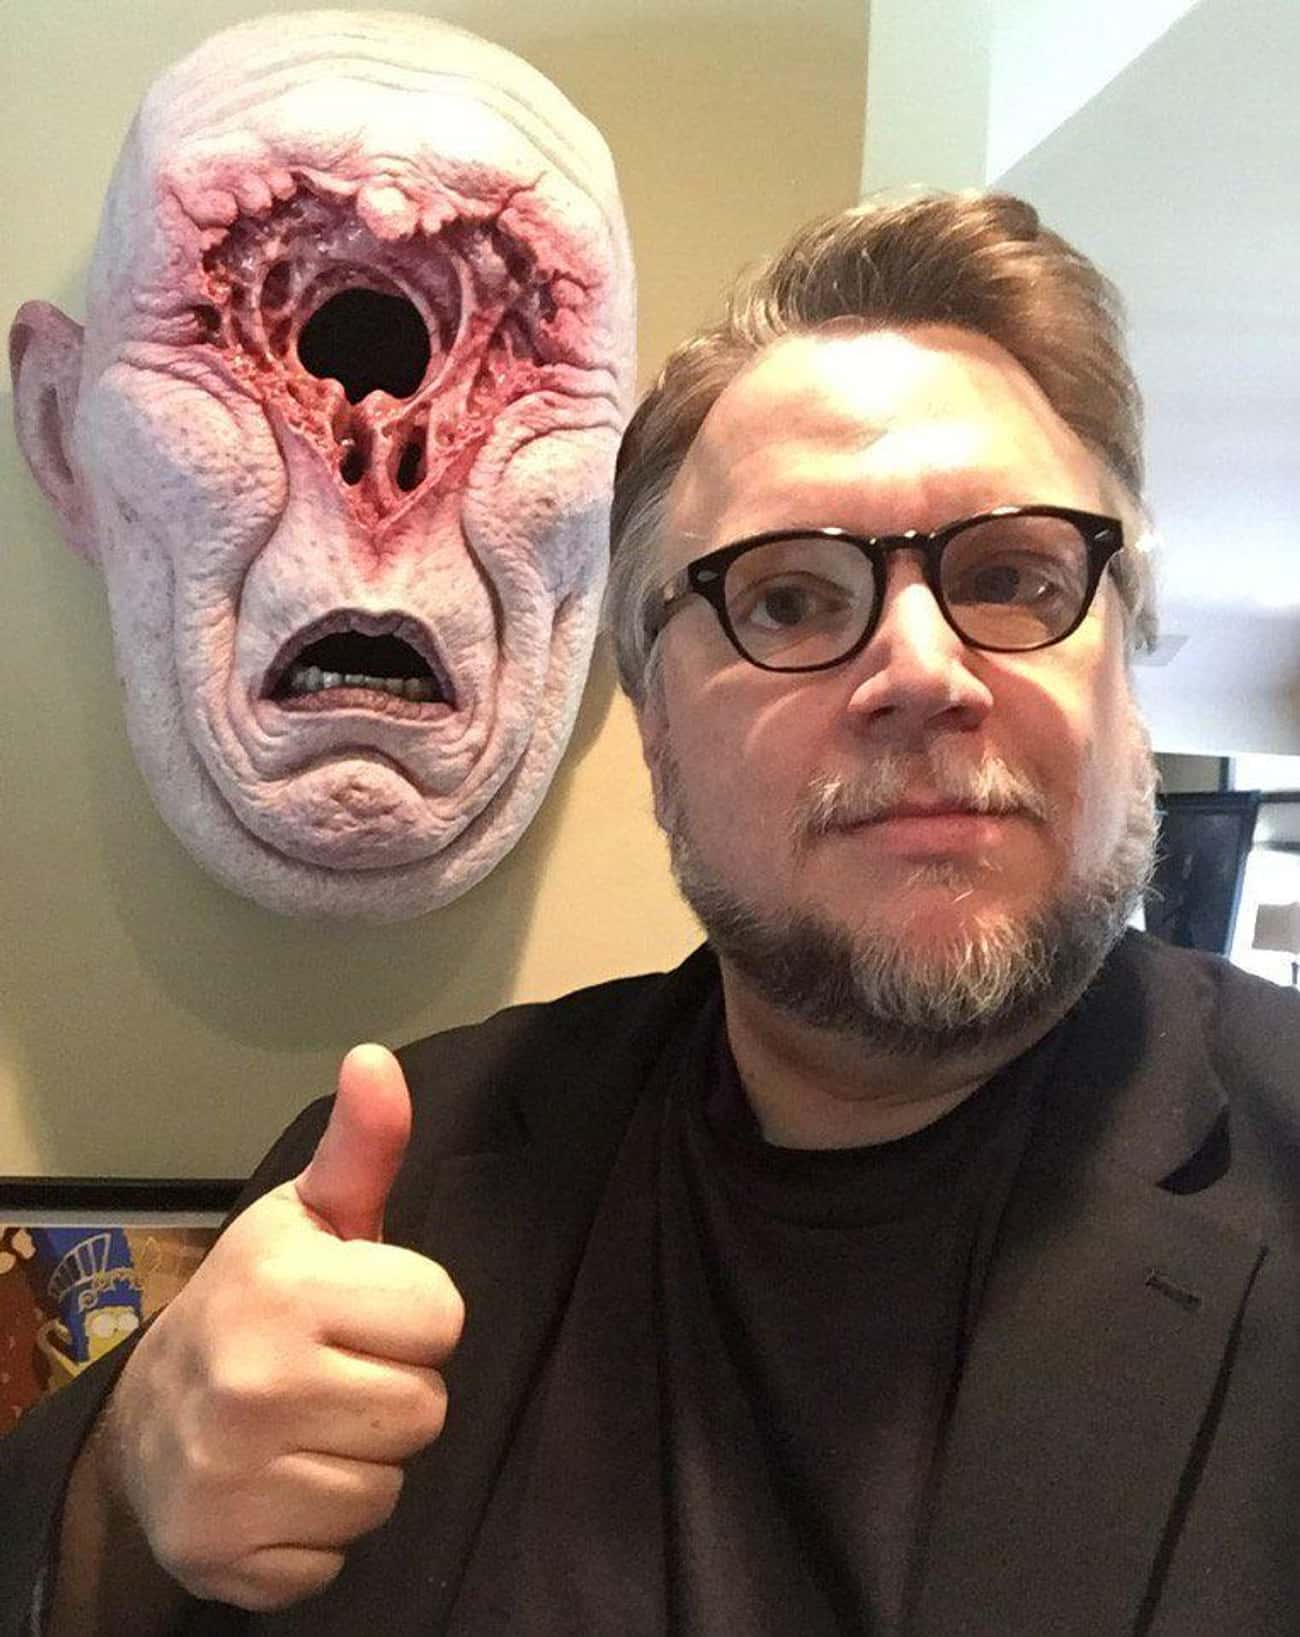 Del Toro Considers Bleak House To Be His Own Holy Place